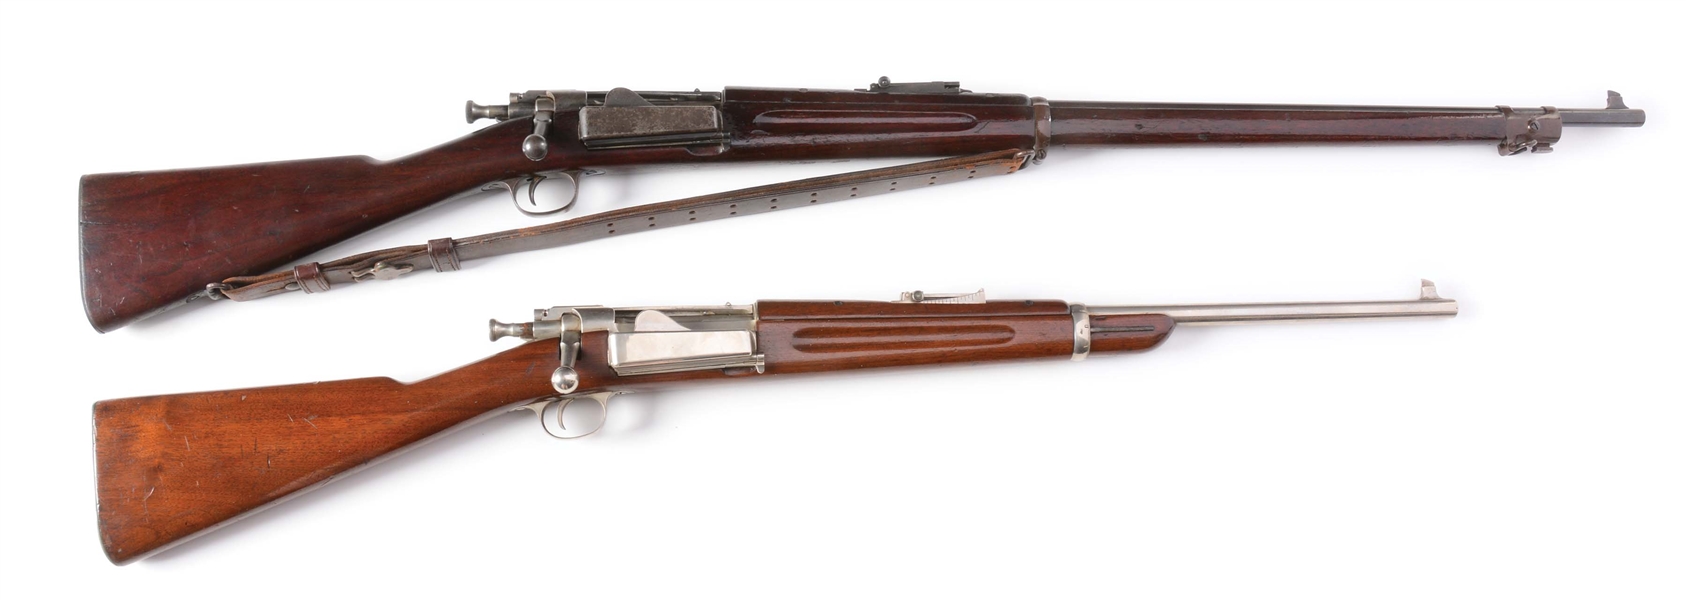 (C) LOT OF TWO: TWO SPRINGFIELD KRAGS, ONE 1898 MODEL RIFLE & ONE 1899 MODEL CARBINE.